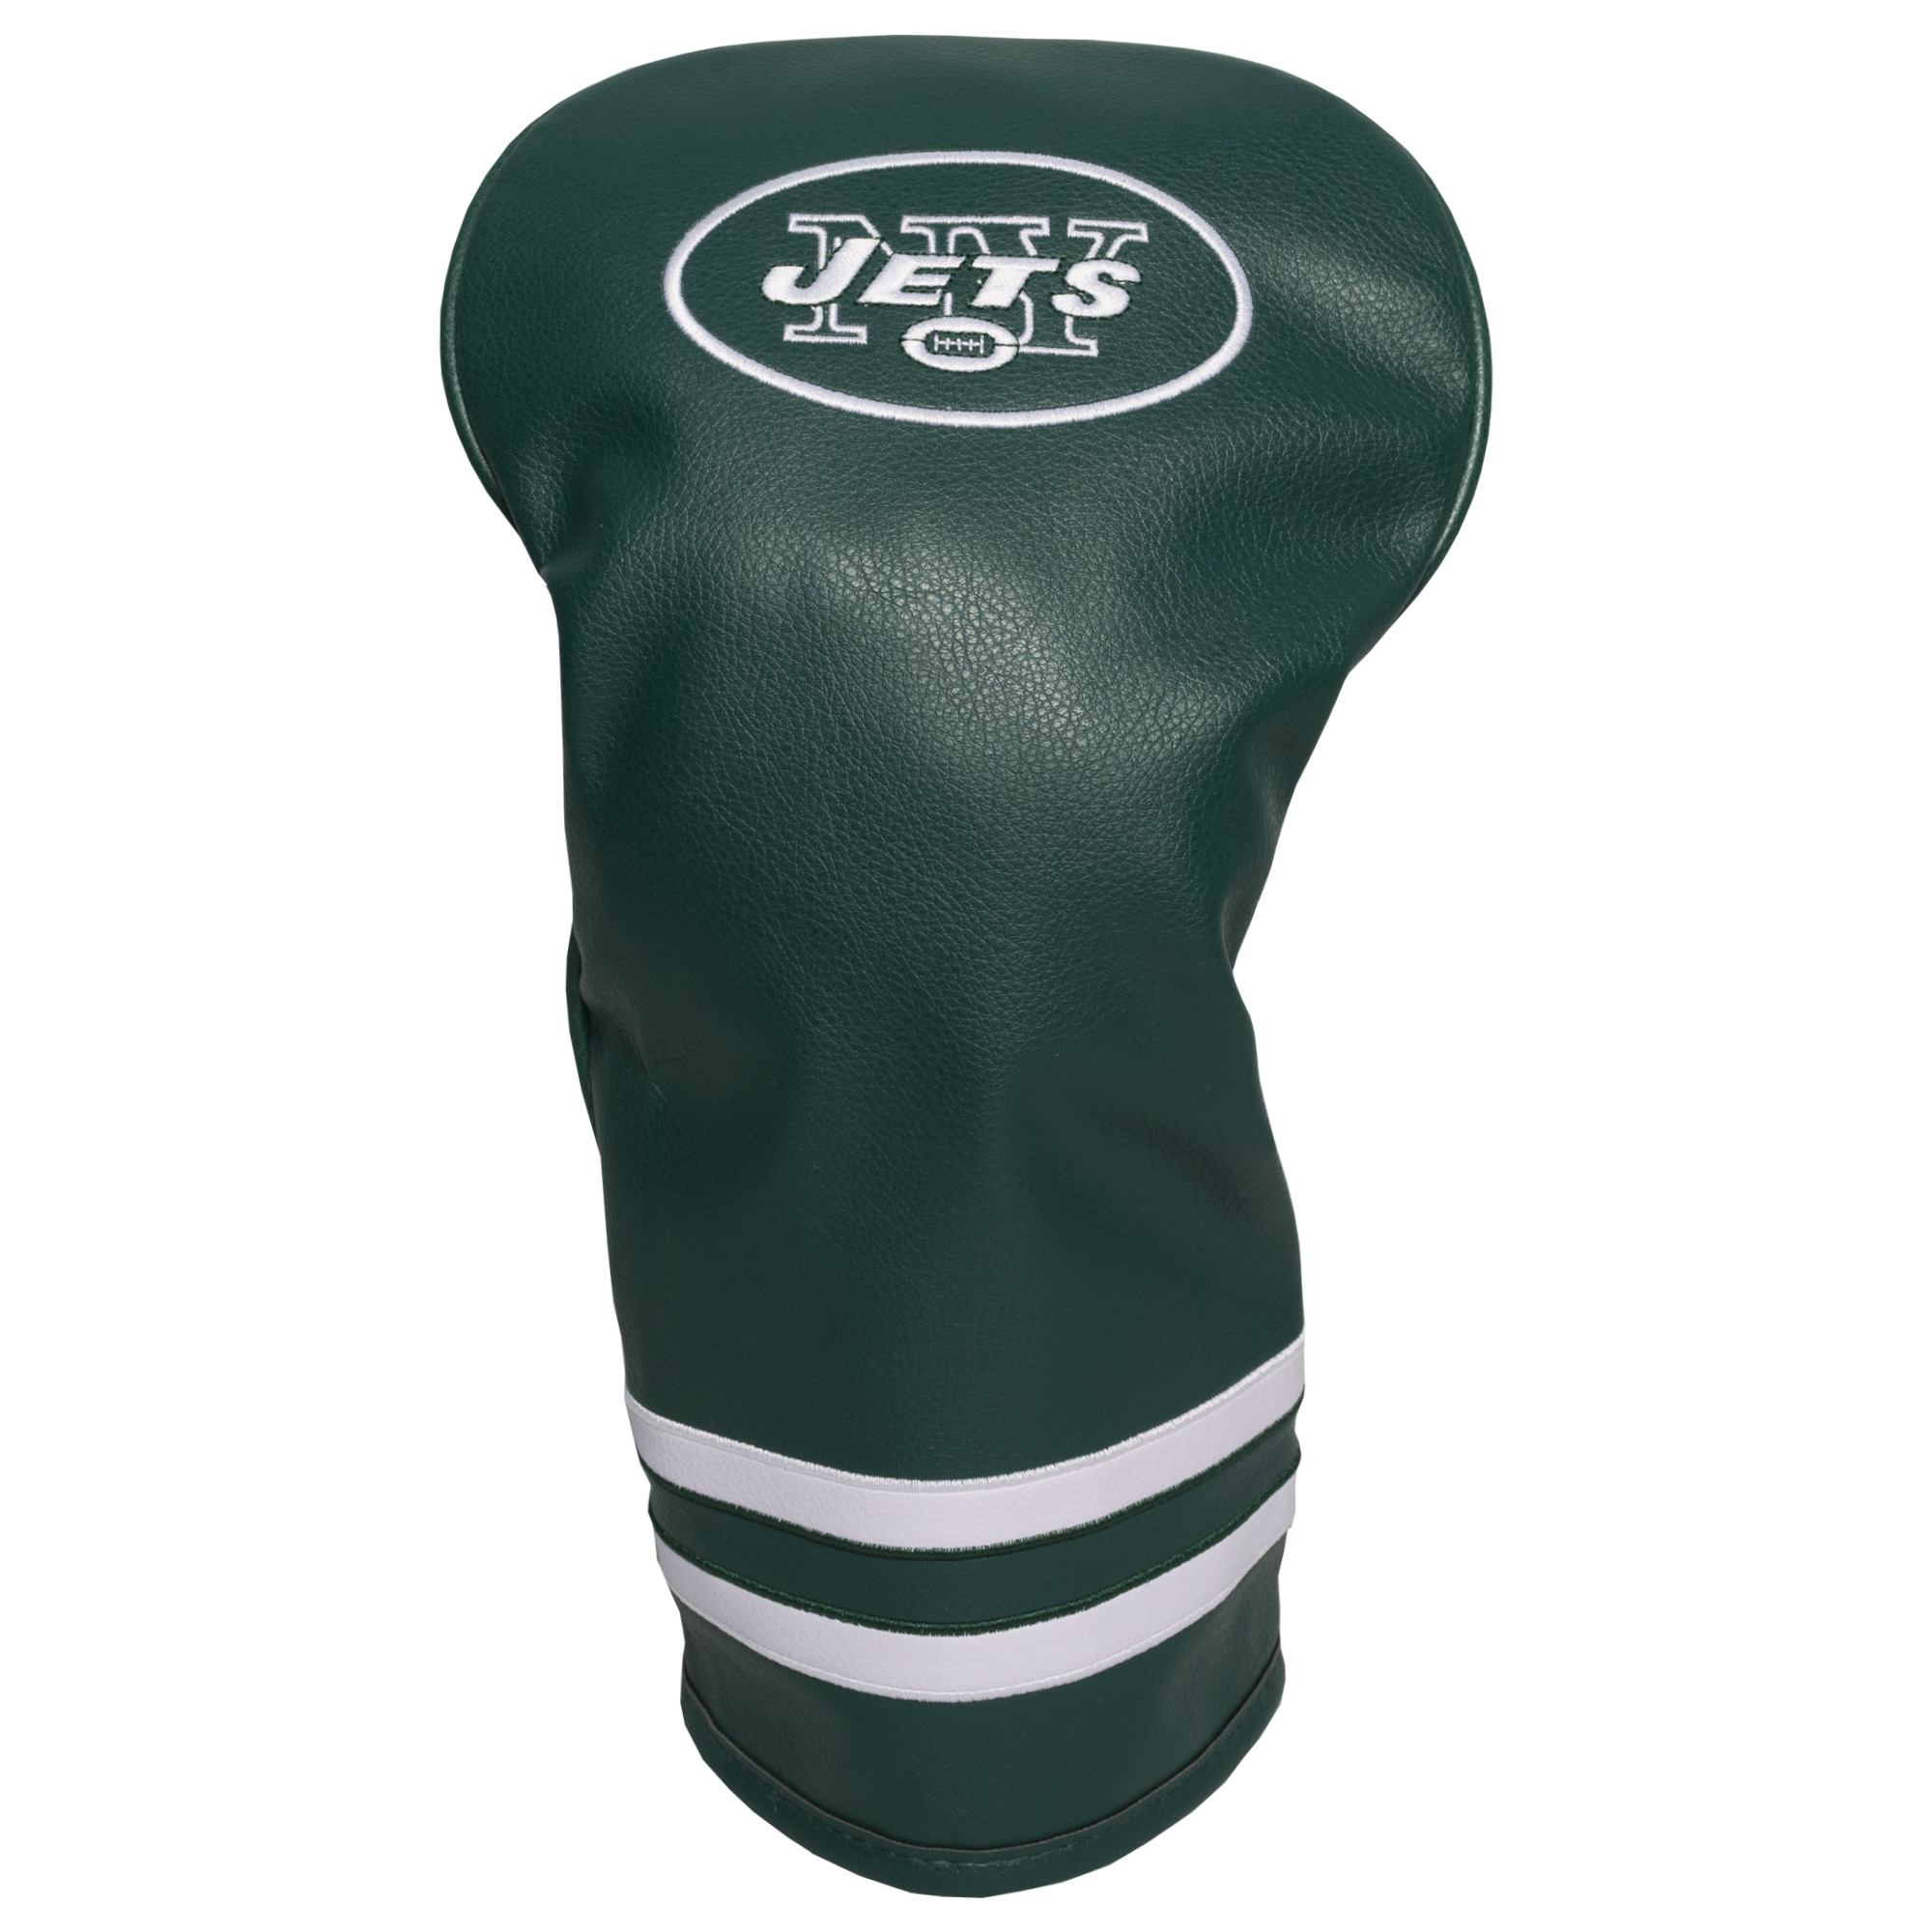 New York Jets Vintage Driver Headcover